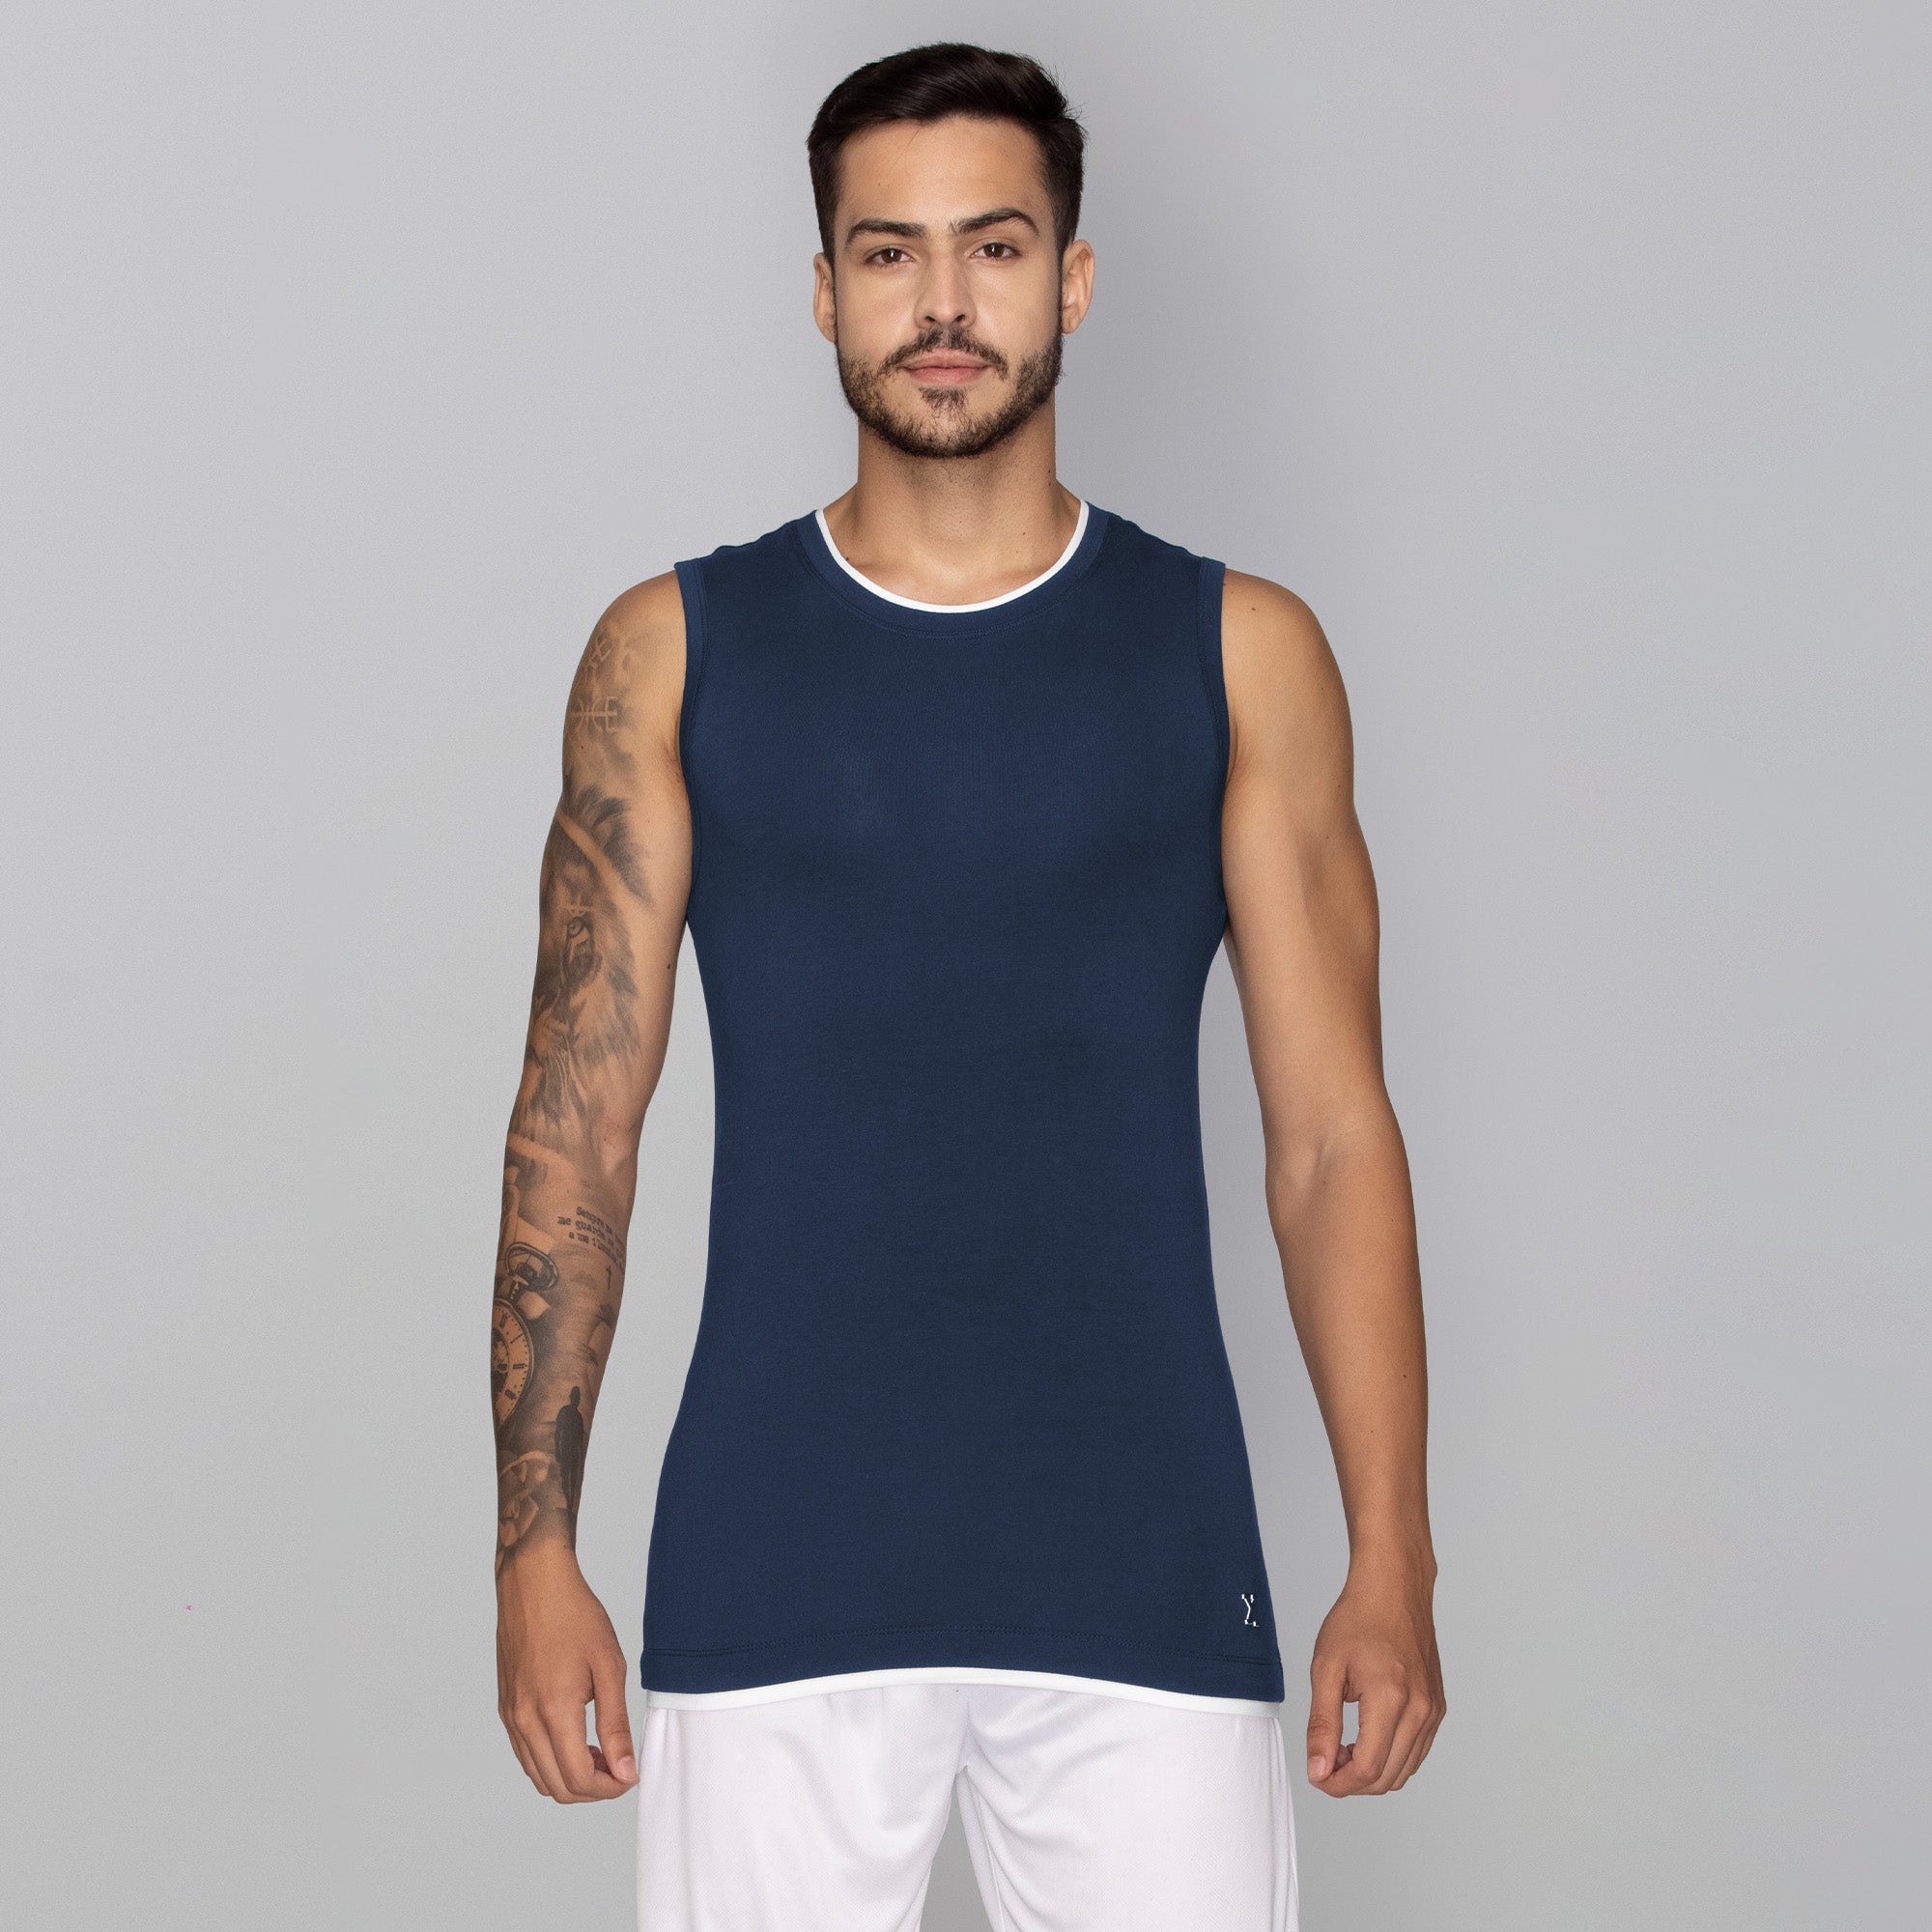 Activo Combed Cotton Gym Vests For Men Pack of 2 (All Navy) - XYXX Mens Apparels